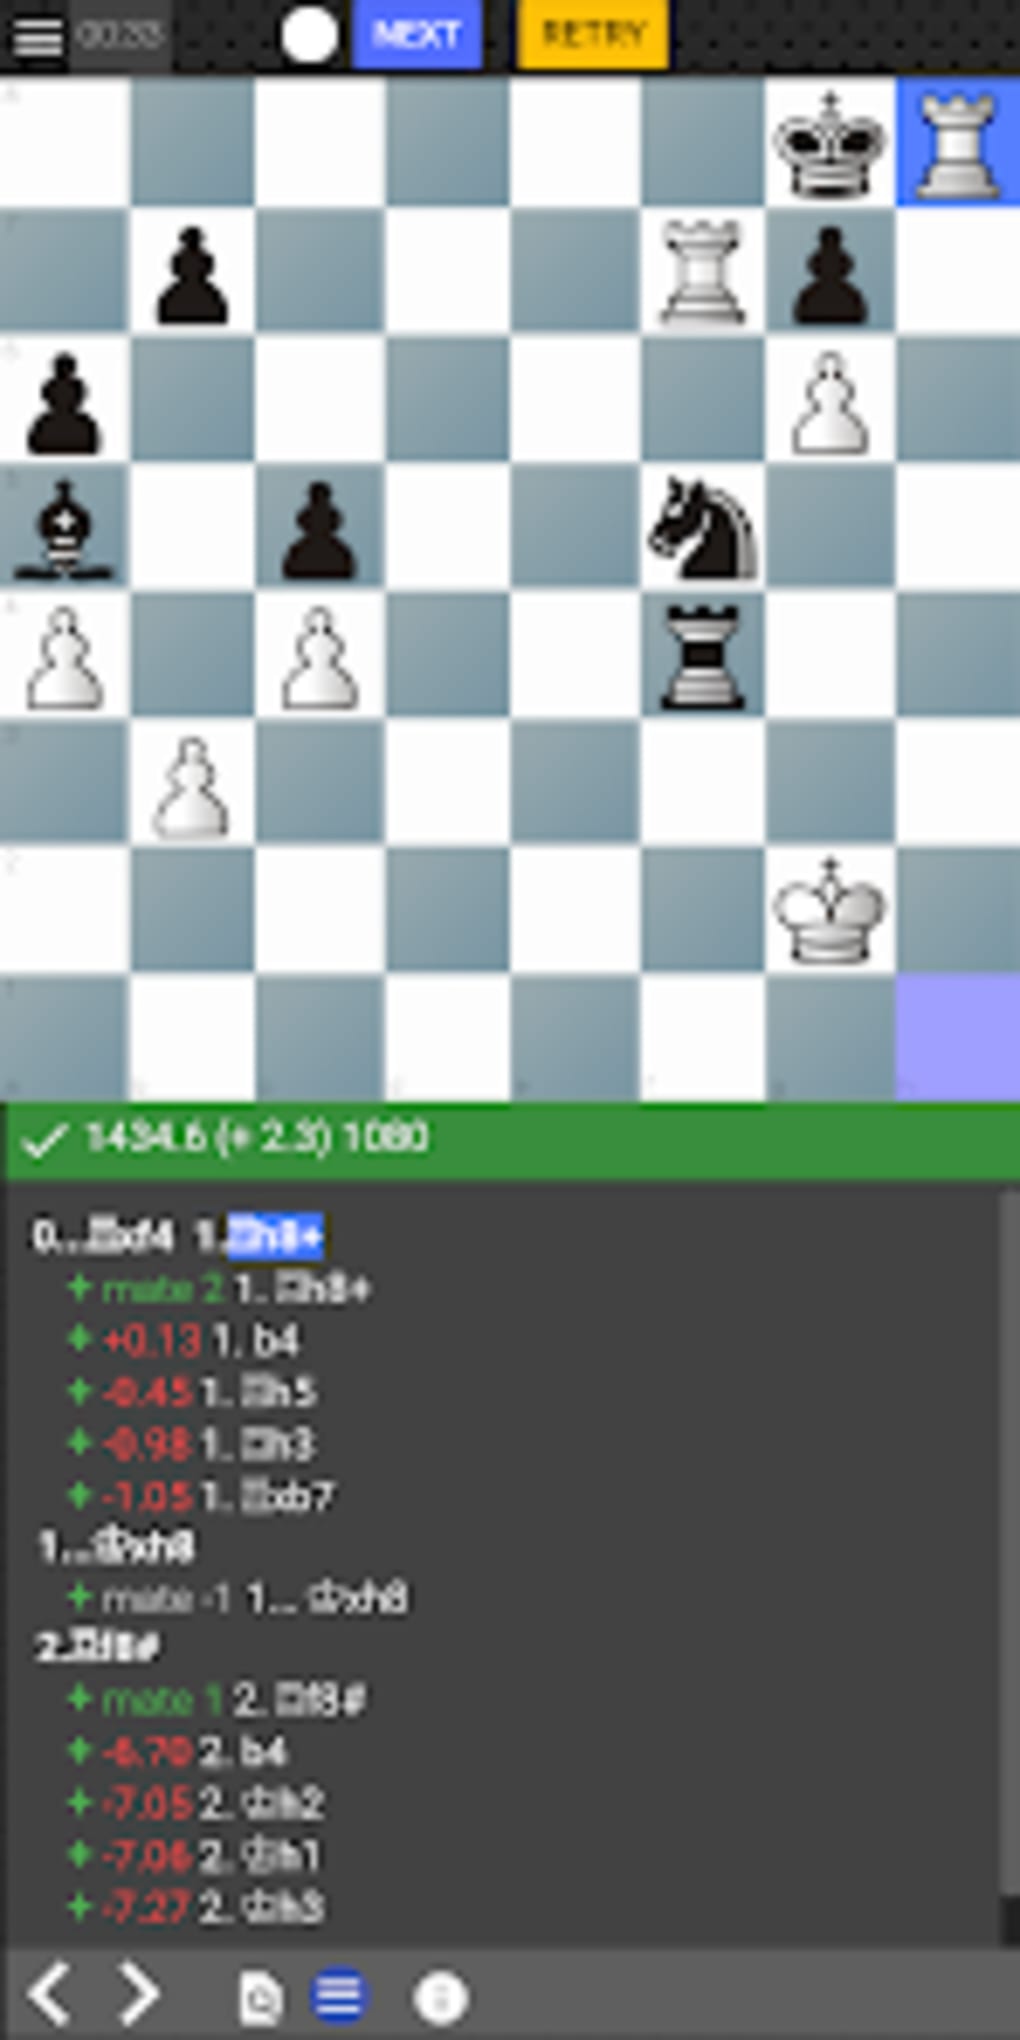 Chess ELO 1.2 Free Download